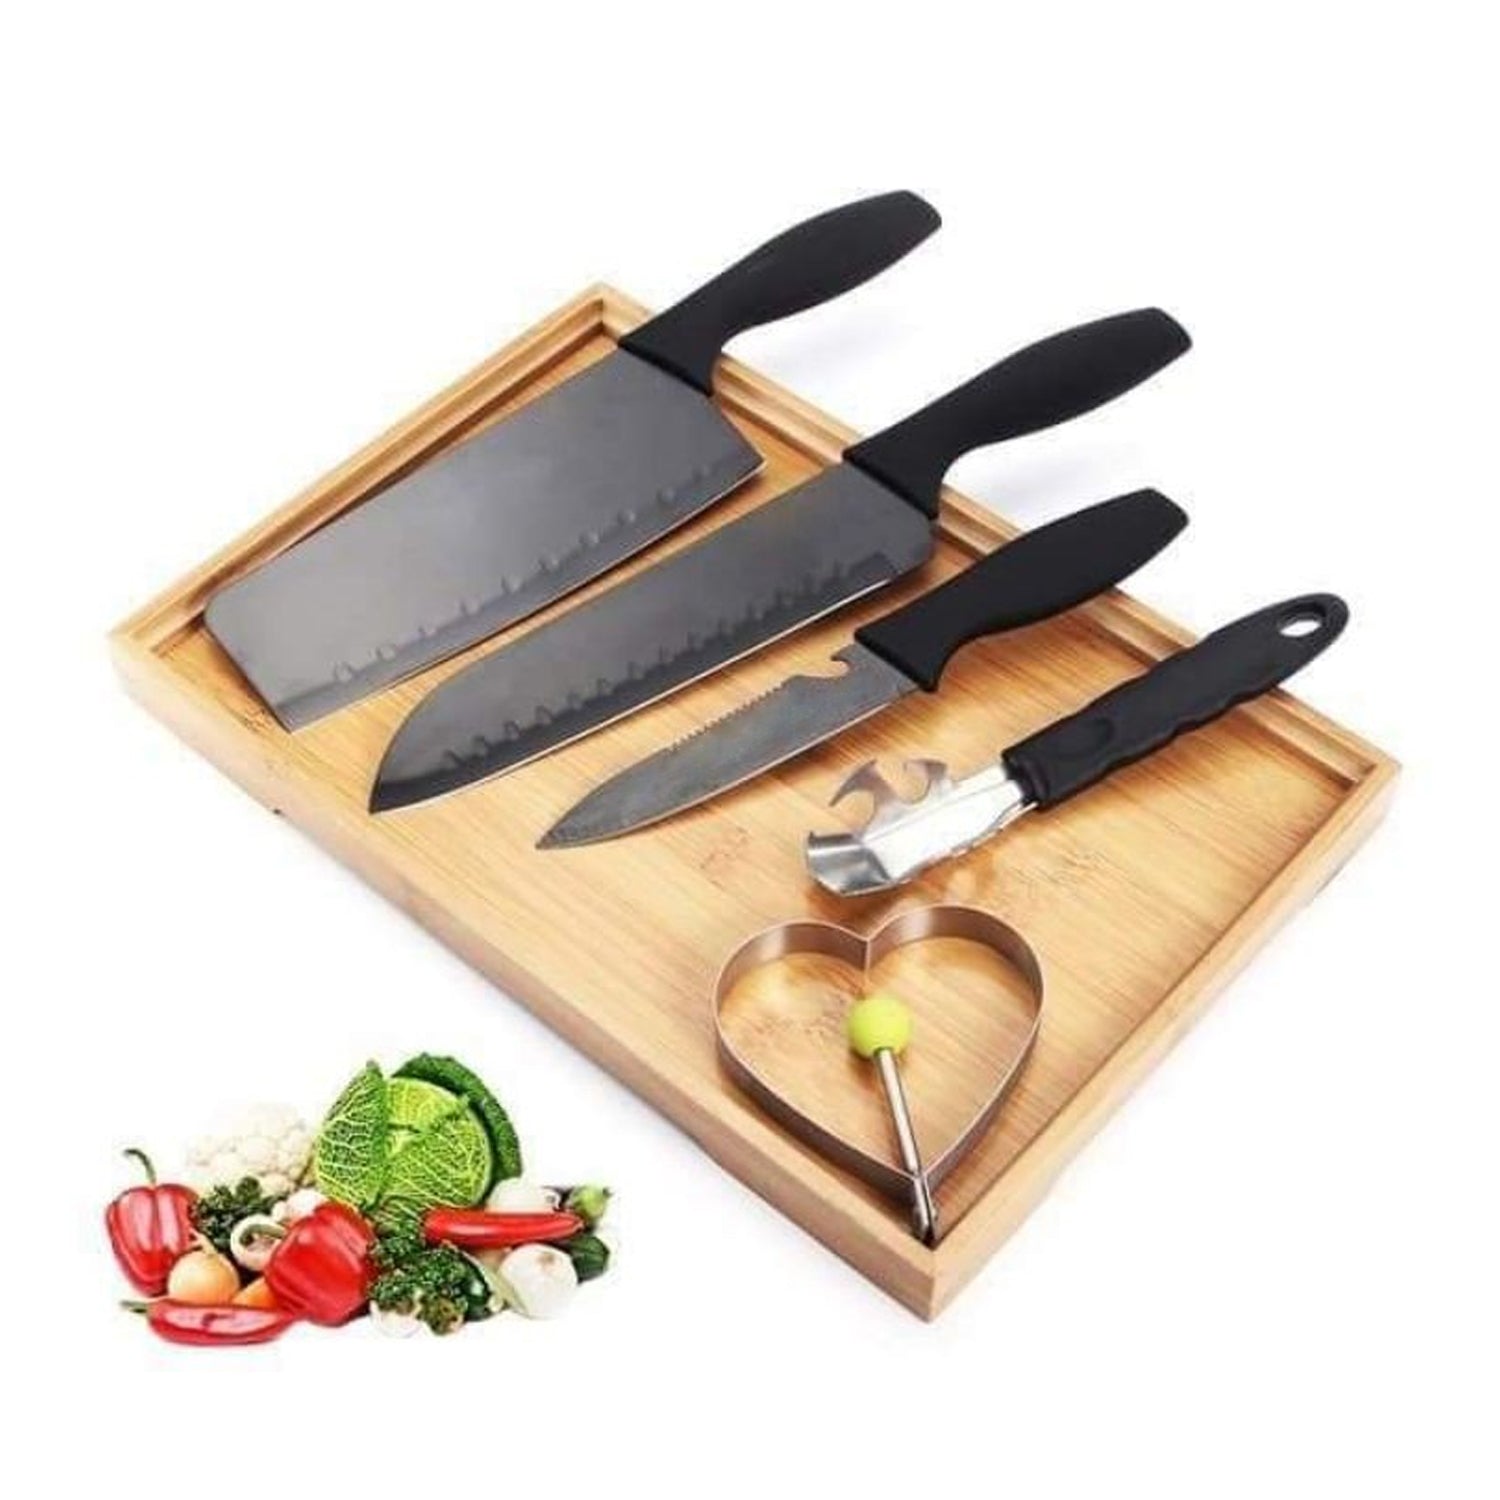 Kitchen Chef Cutlery Stainless Steel Knife Set, Chopping Knife, Chef Knife, Utility Knife, Butcher Knife (Pack of 5pc).